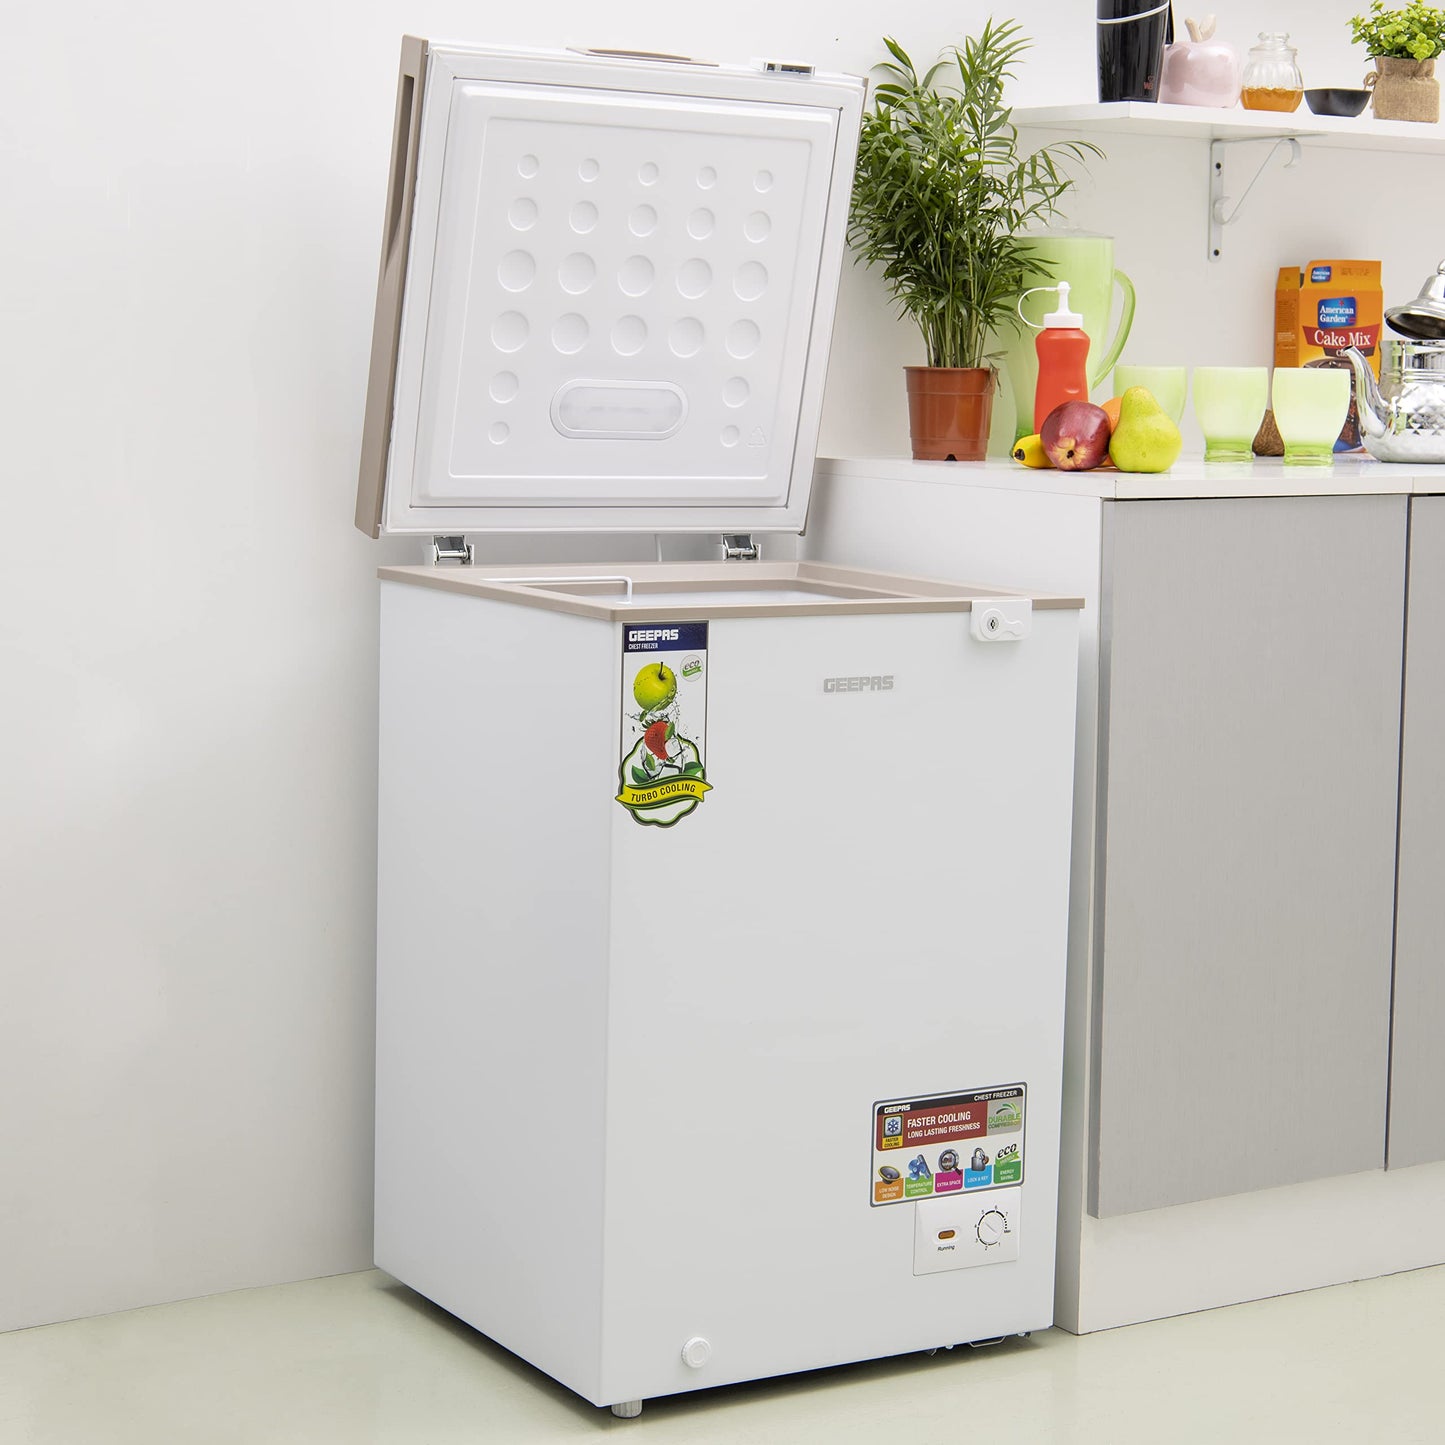 Geepas Freestanding Chest Freezer, | Deep Freezer with Adjustable Thermostat | 1pc Food Basket Included | LED Light | Comes with Lock & Key